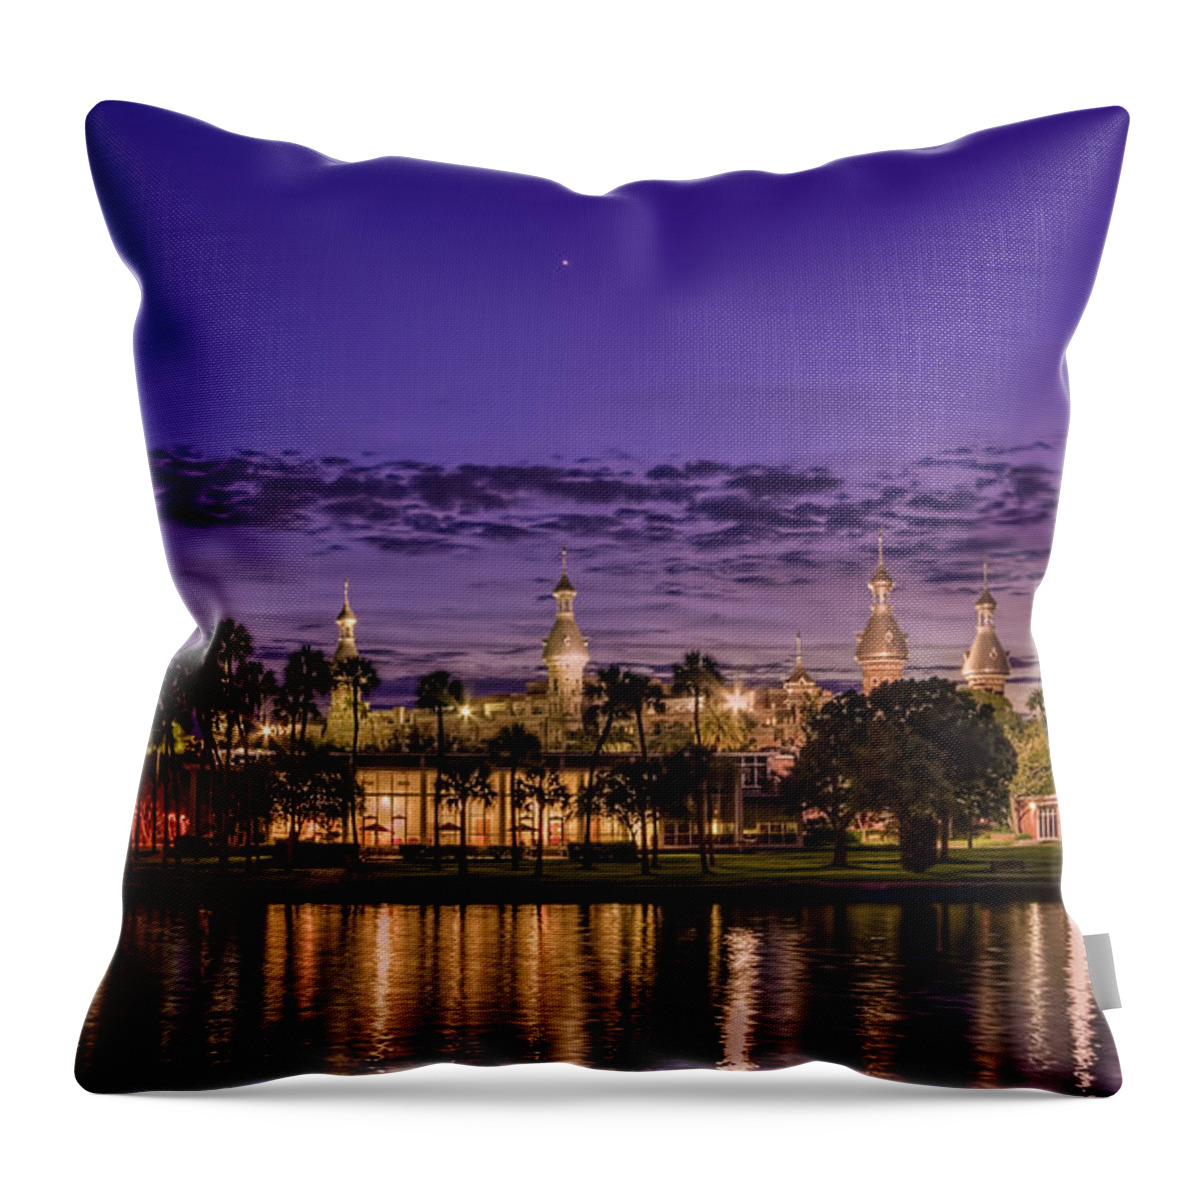 Minarets Throw Pillow featuring the photograph Venus Over the Minarets by Marvin Spates